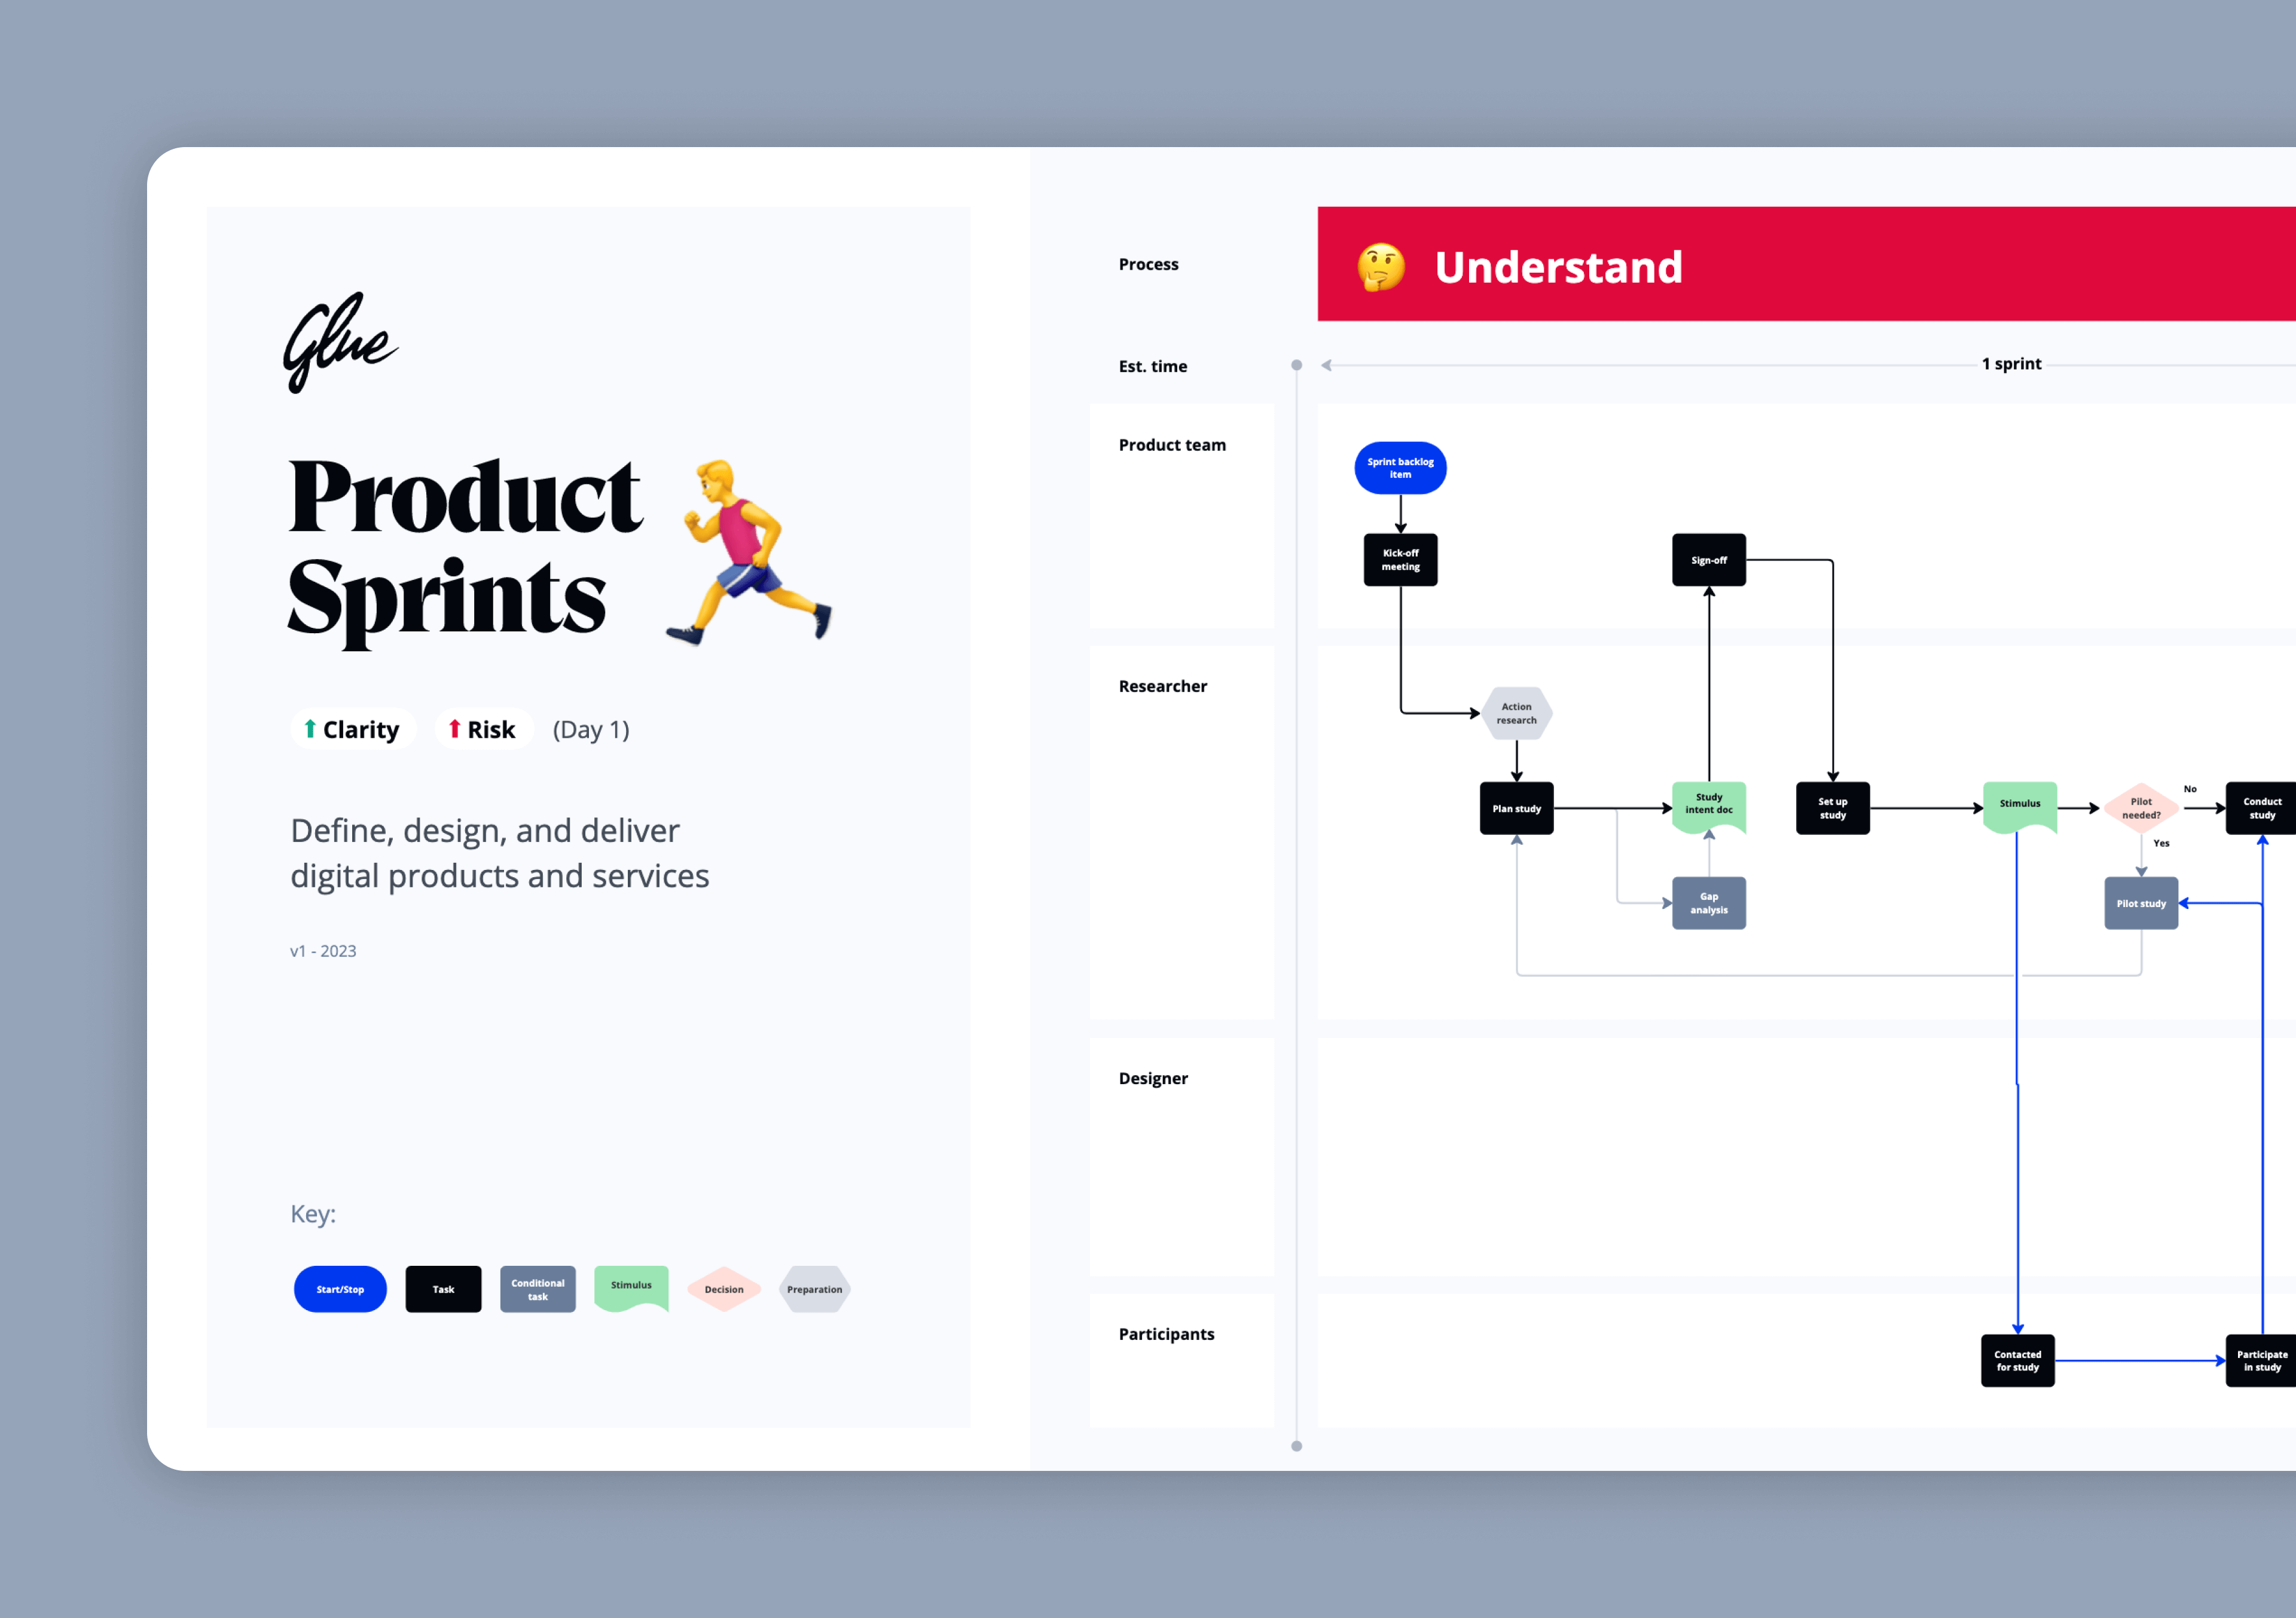 Visualisation of the Glue Product design product sprints framework workflow followed by the Glue design, strategy and research team to deliver high-end client projects